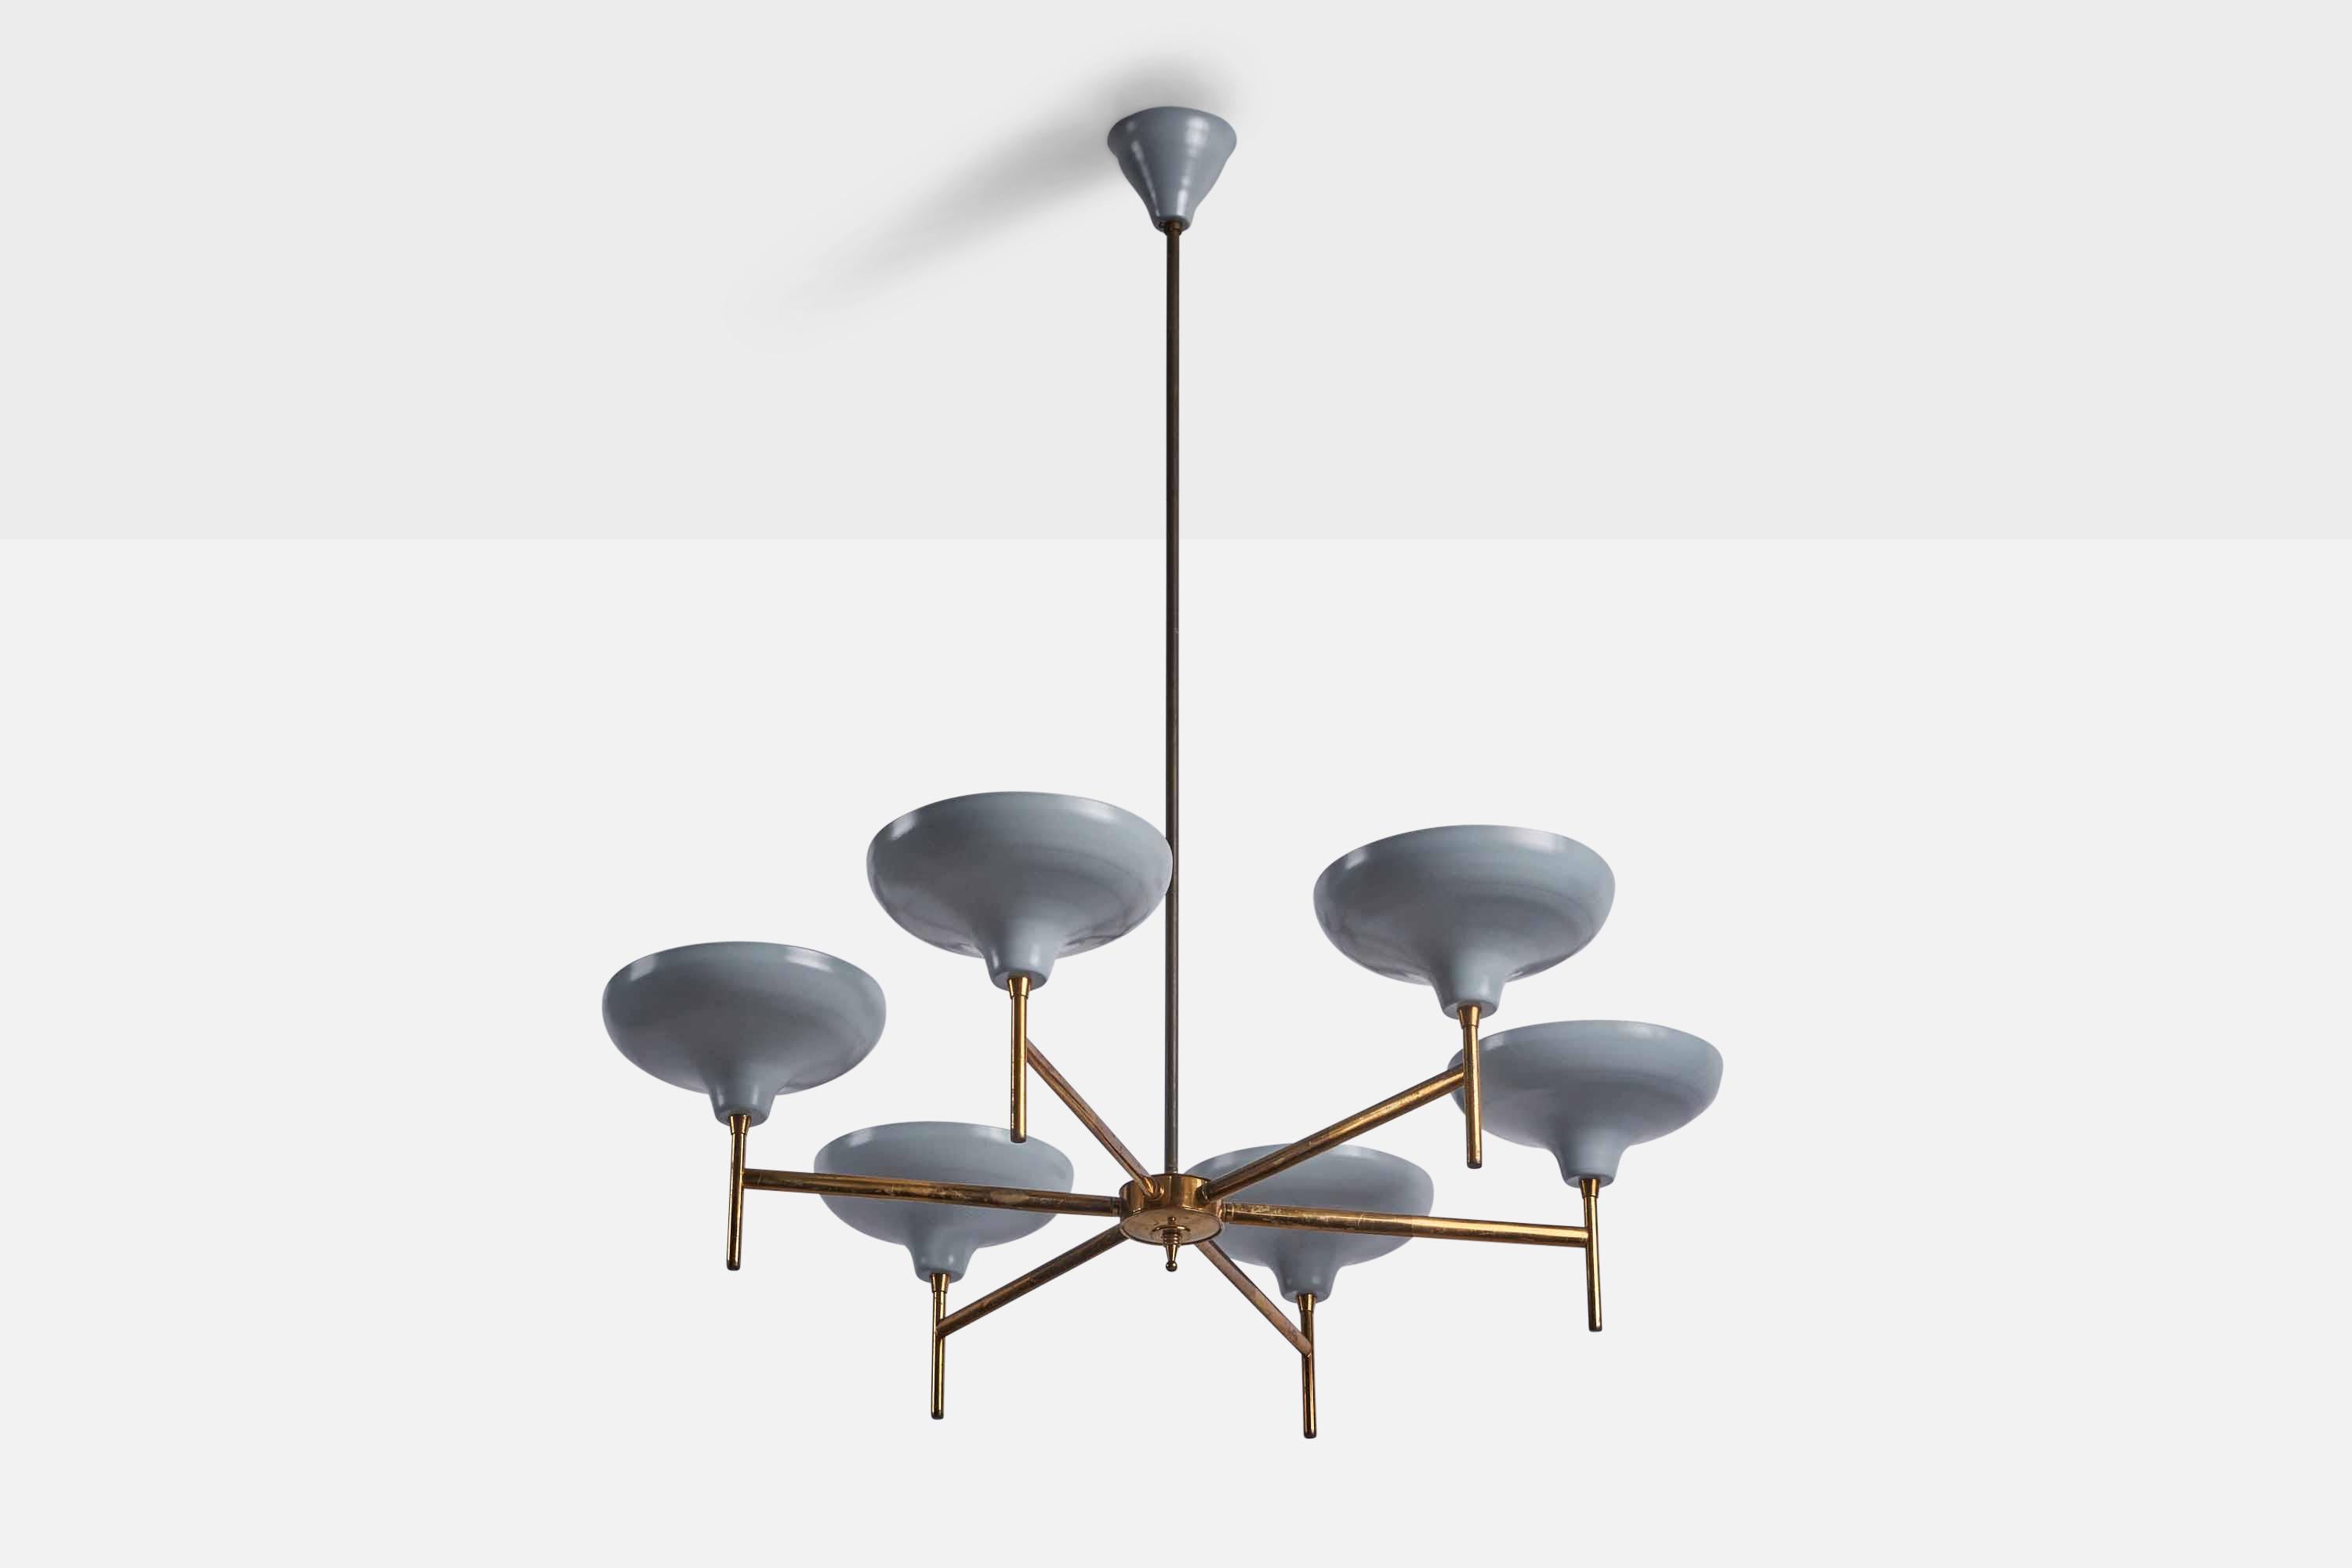 A six-armed brass and grey-lacquered metal chandelier designed and produced in Italy, 1950s.

Overall Dimensions (inches): 37” H x 30” Diameter

Bulb Specifications: E-26 Bulb

Number of Sockets: 6